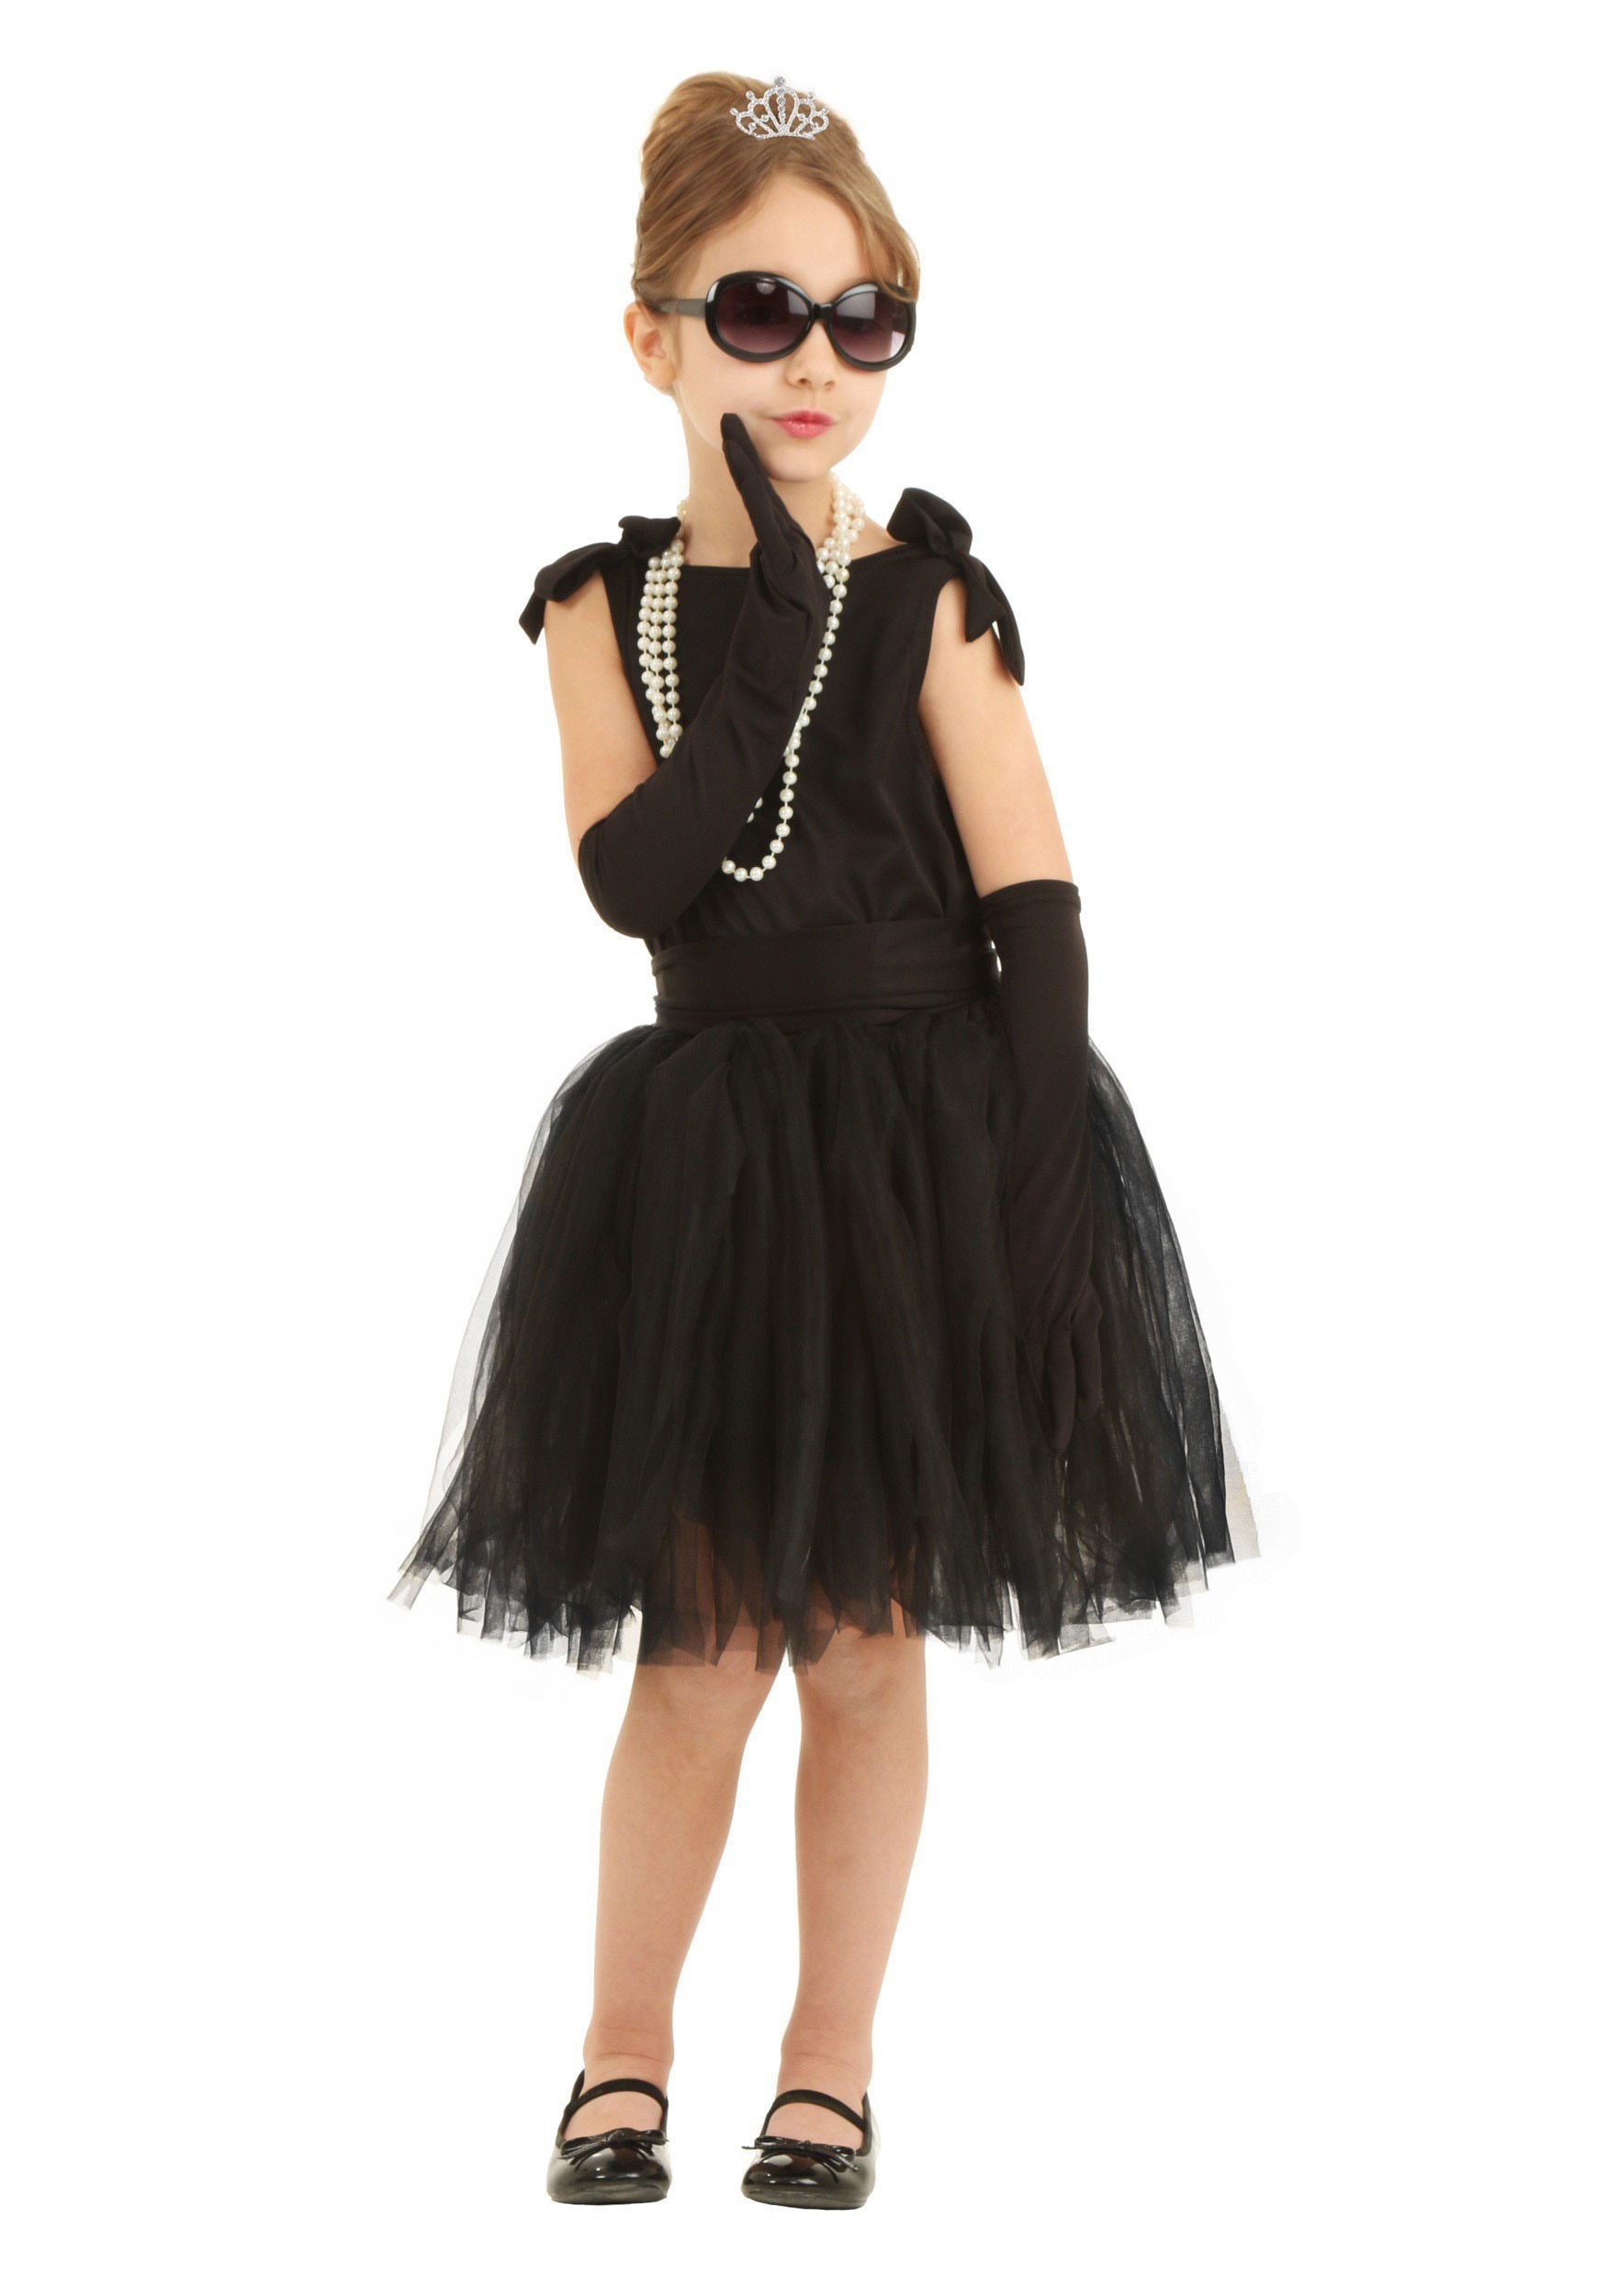 Photos - Fancy Dress FUN Costumes Breakfast at Tiffany's Holly Golightly Child Costume Black